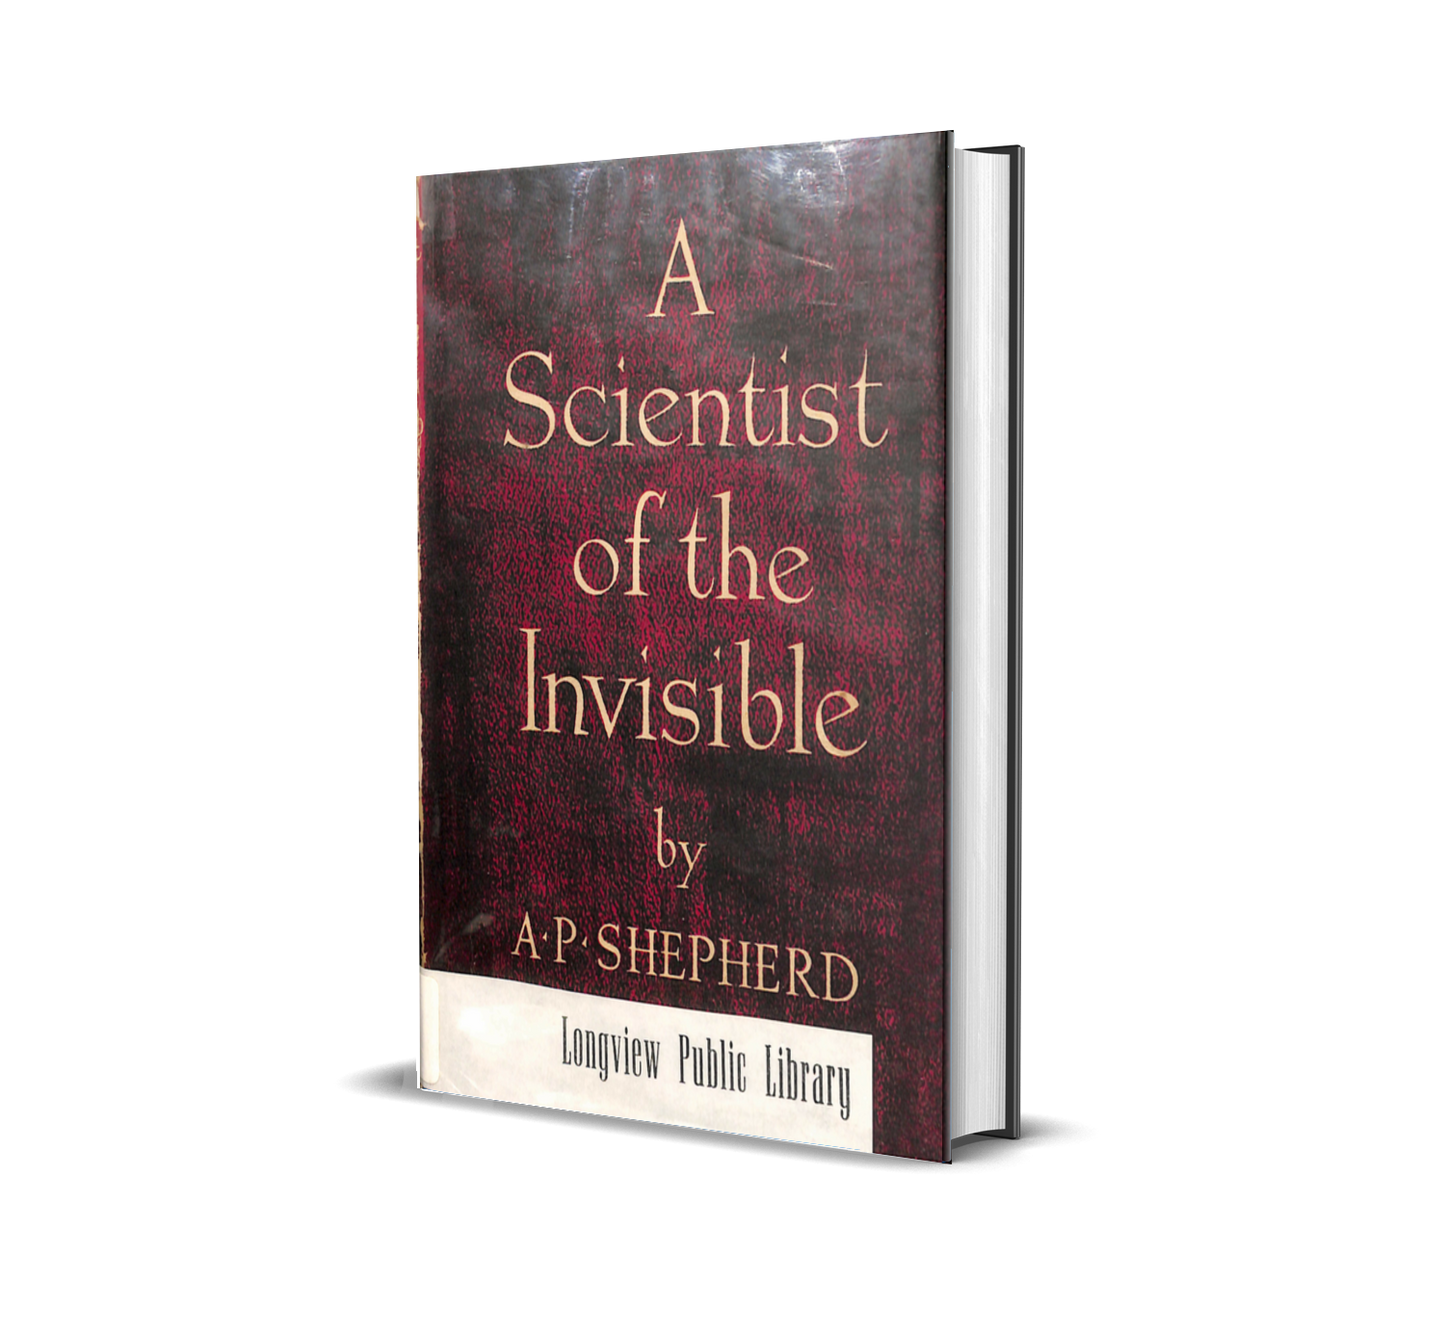 A Scientist of the Invisible